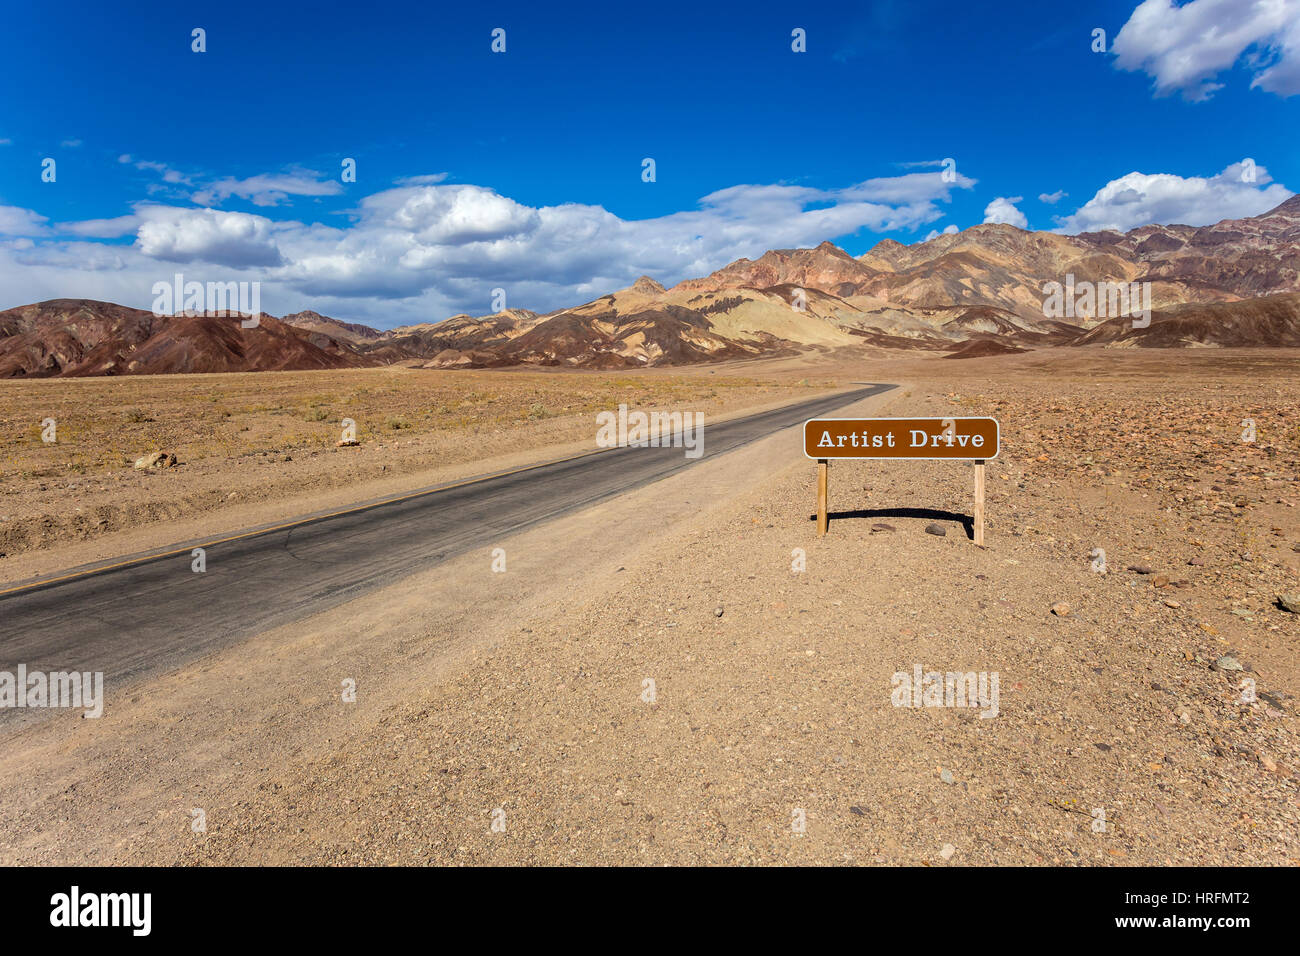 Welcome sign, scenic drive, Artist Drive, Black Mountains, Death Valley National Park, Death Valley, California, United States, North America Stock Photo